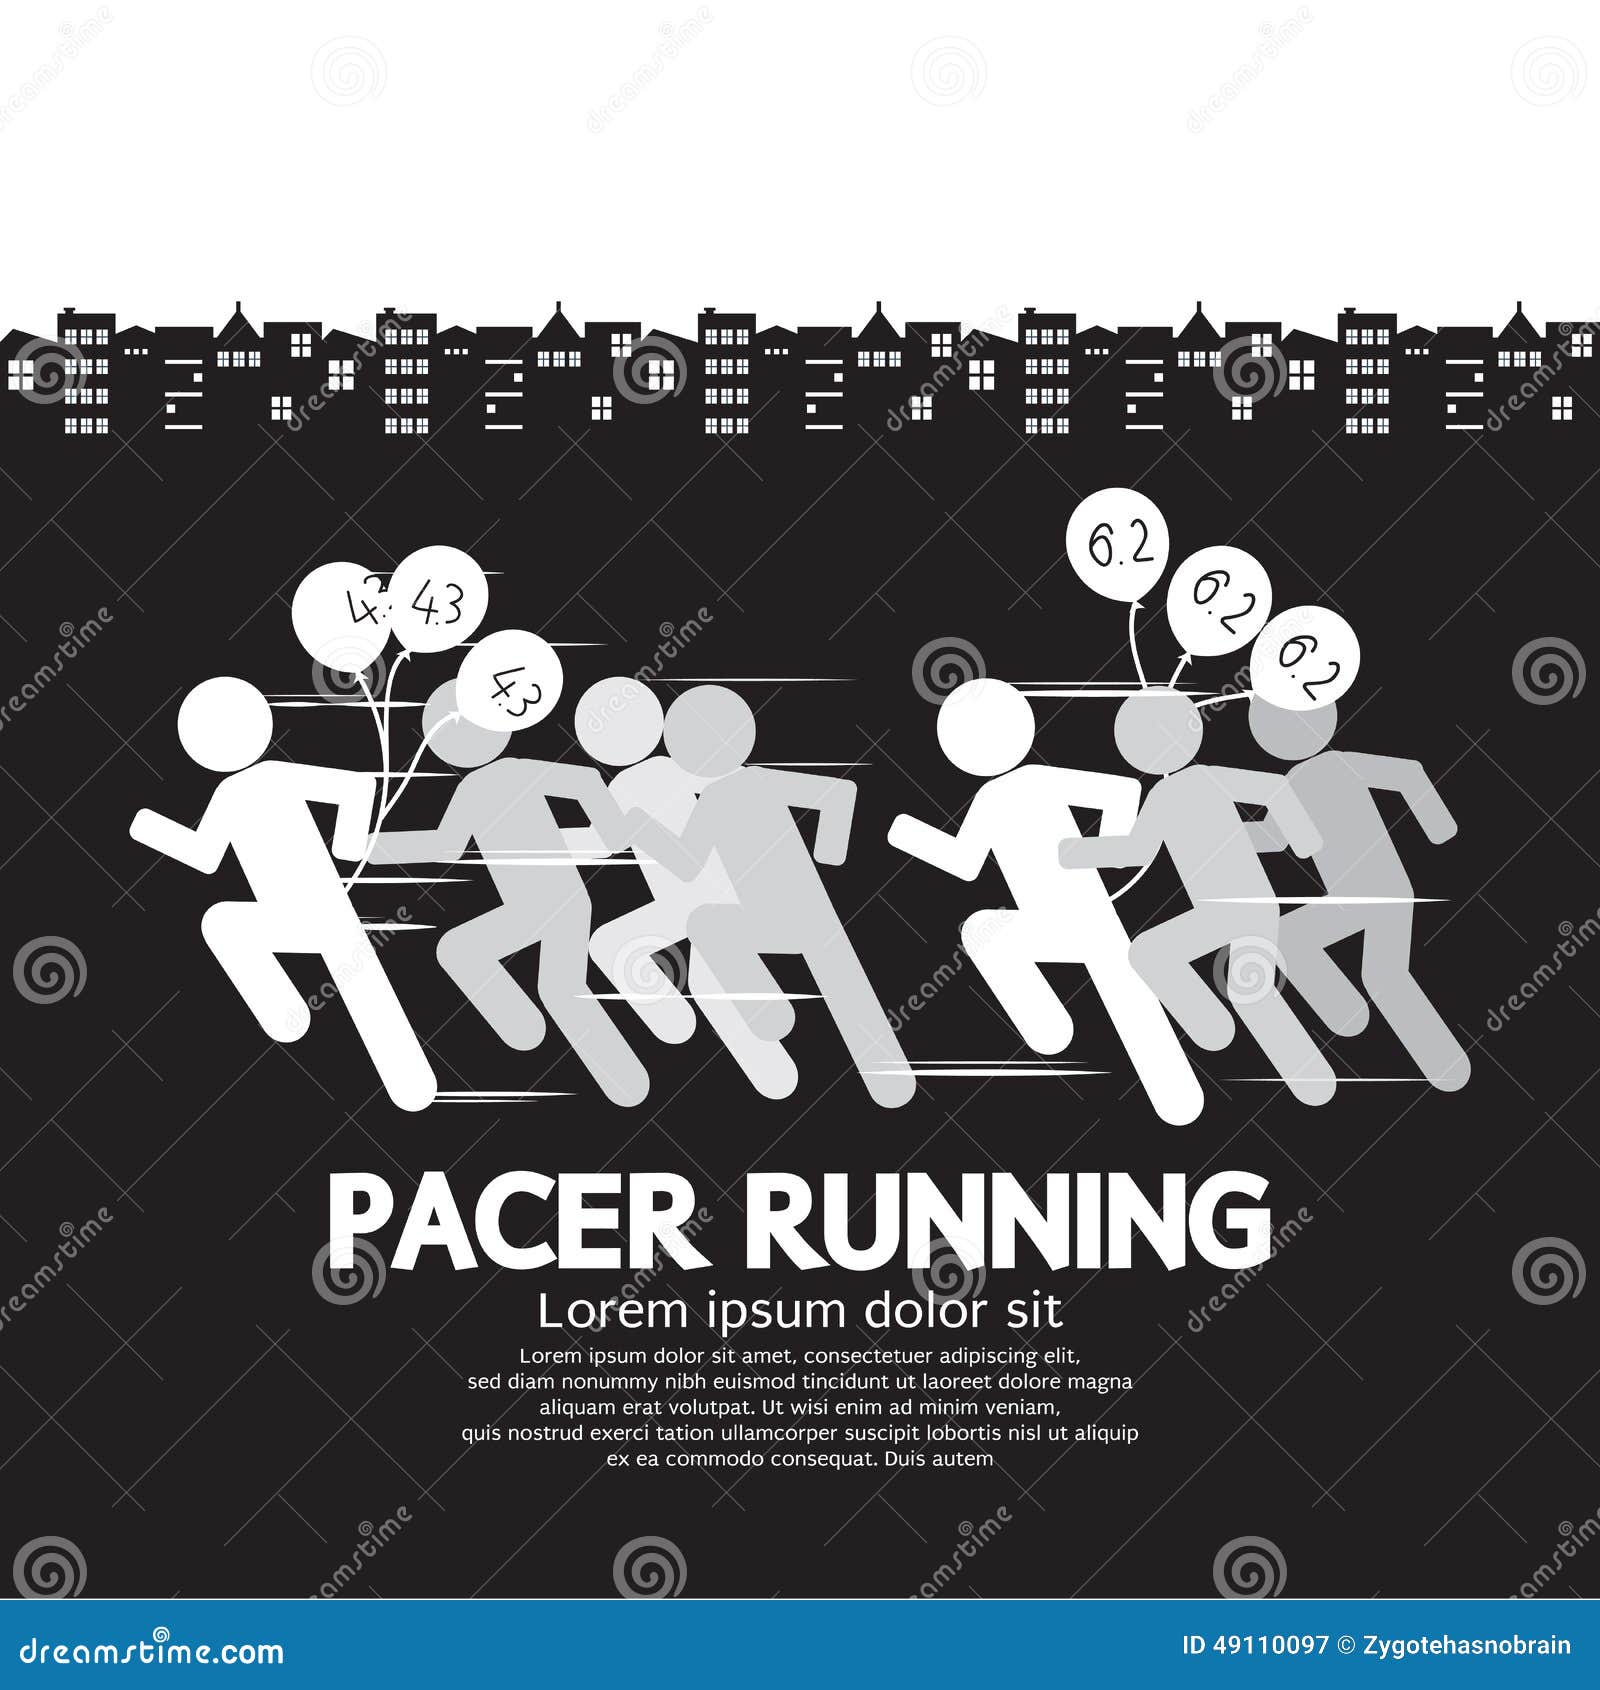 pacer running with balloons 